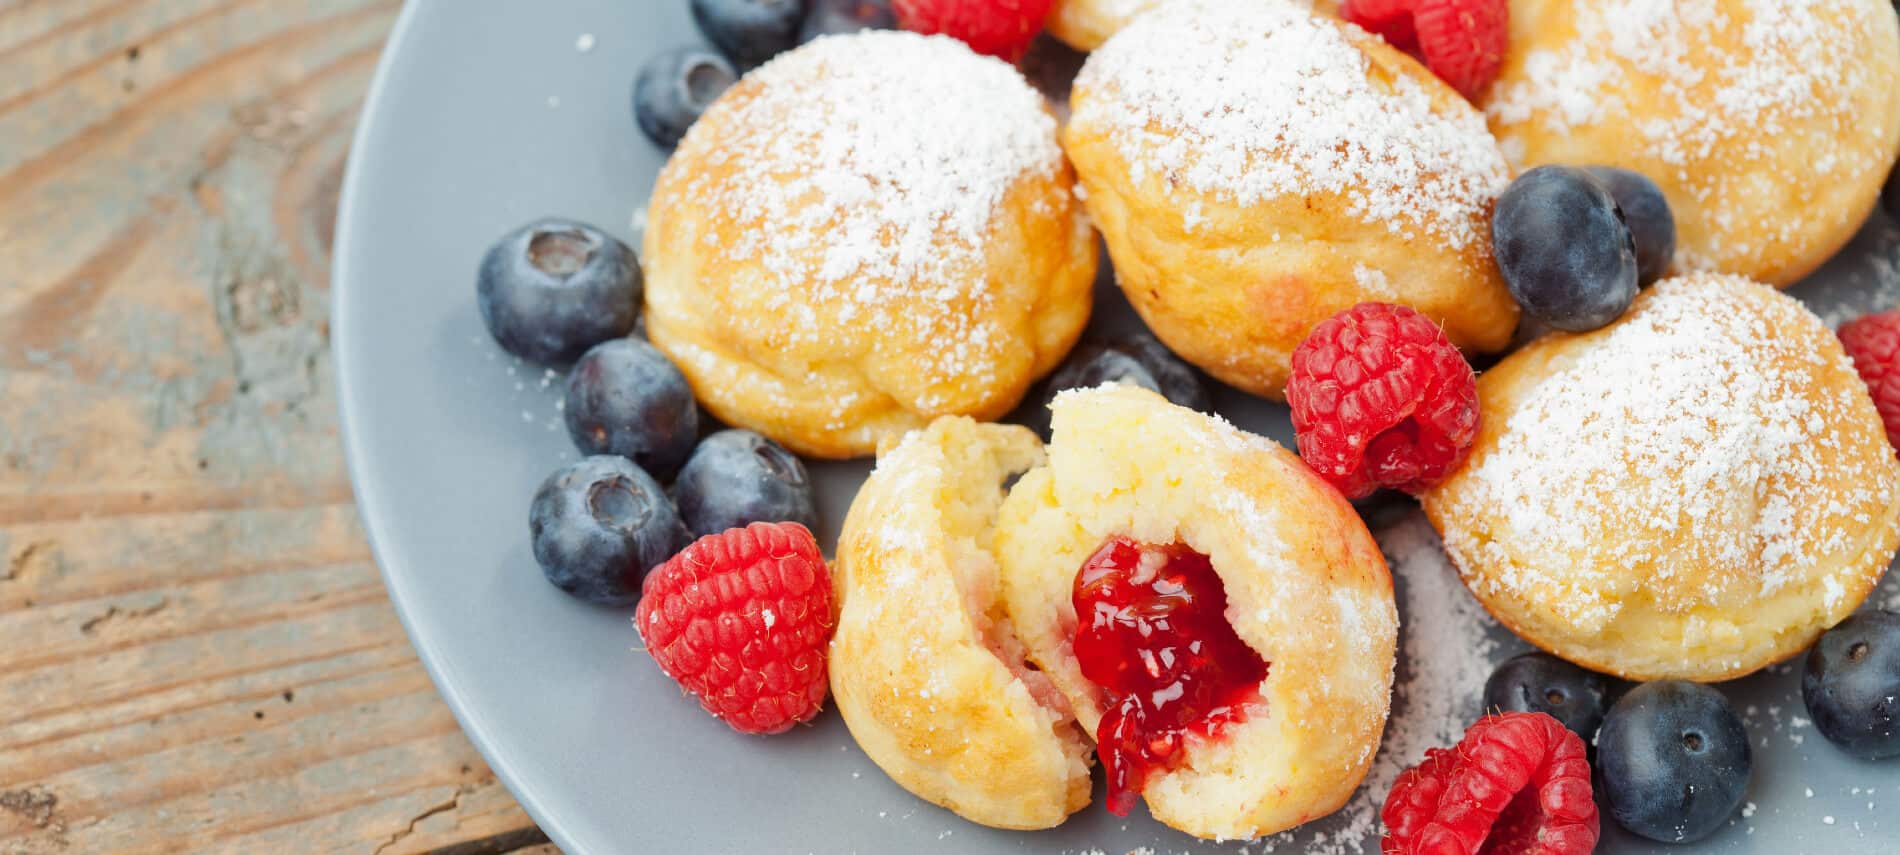 round pancake balls filled with red jam, dusted with powdered sugar and tossed with red and blue beries